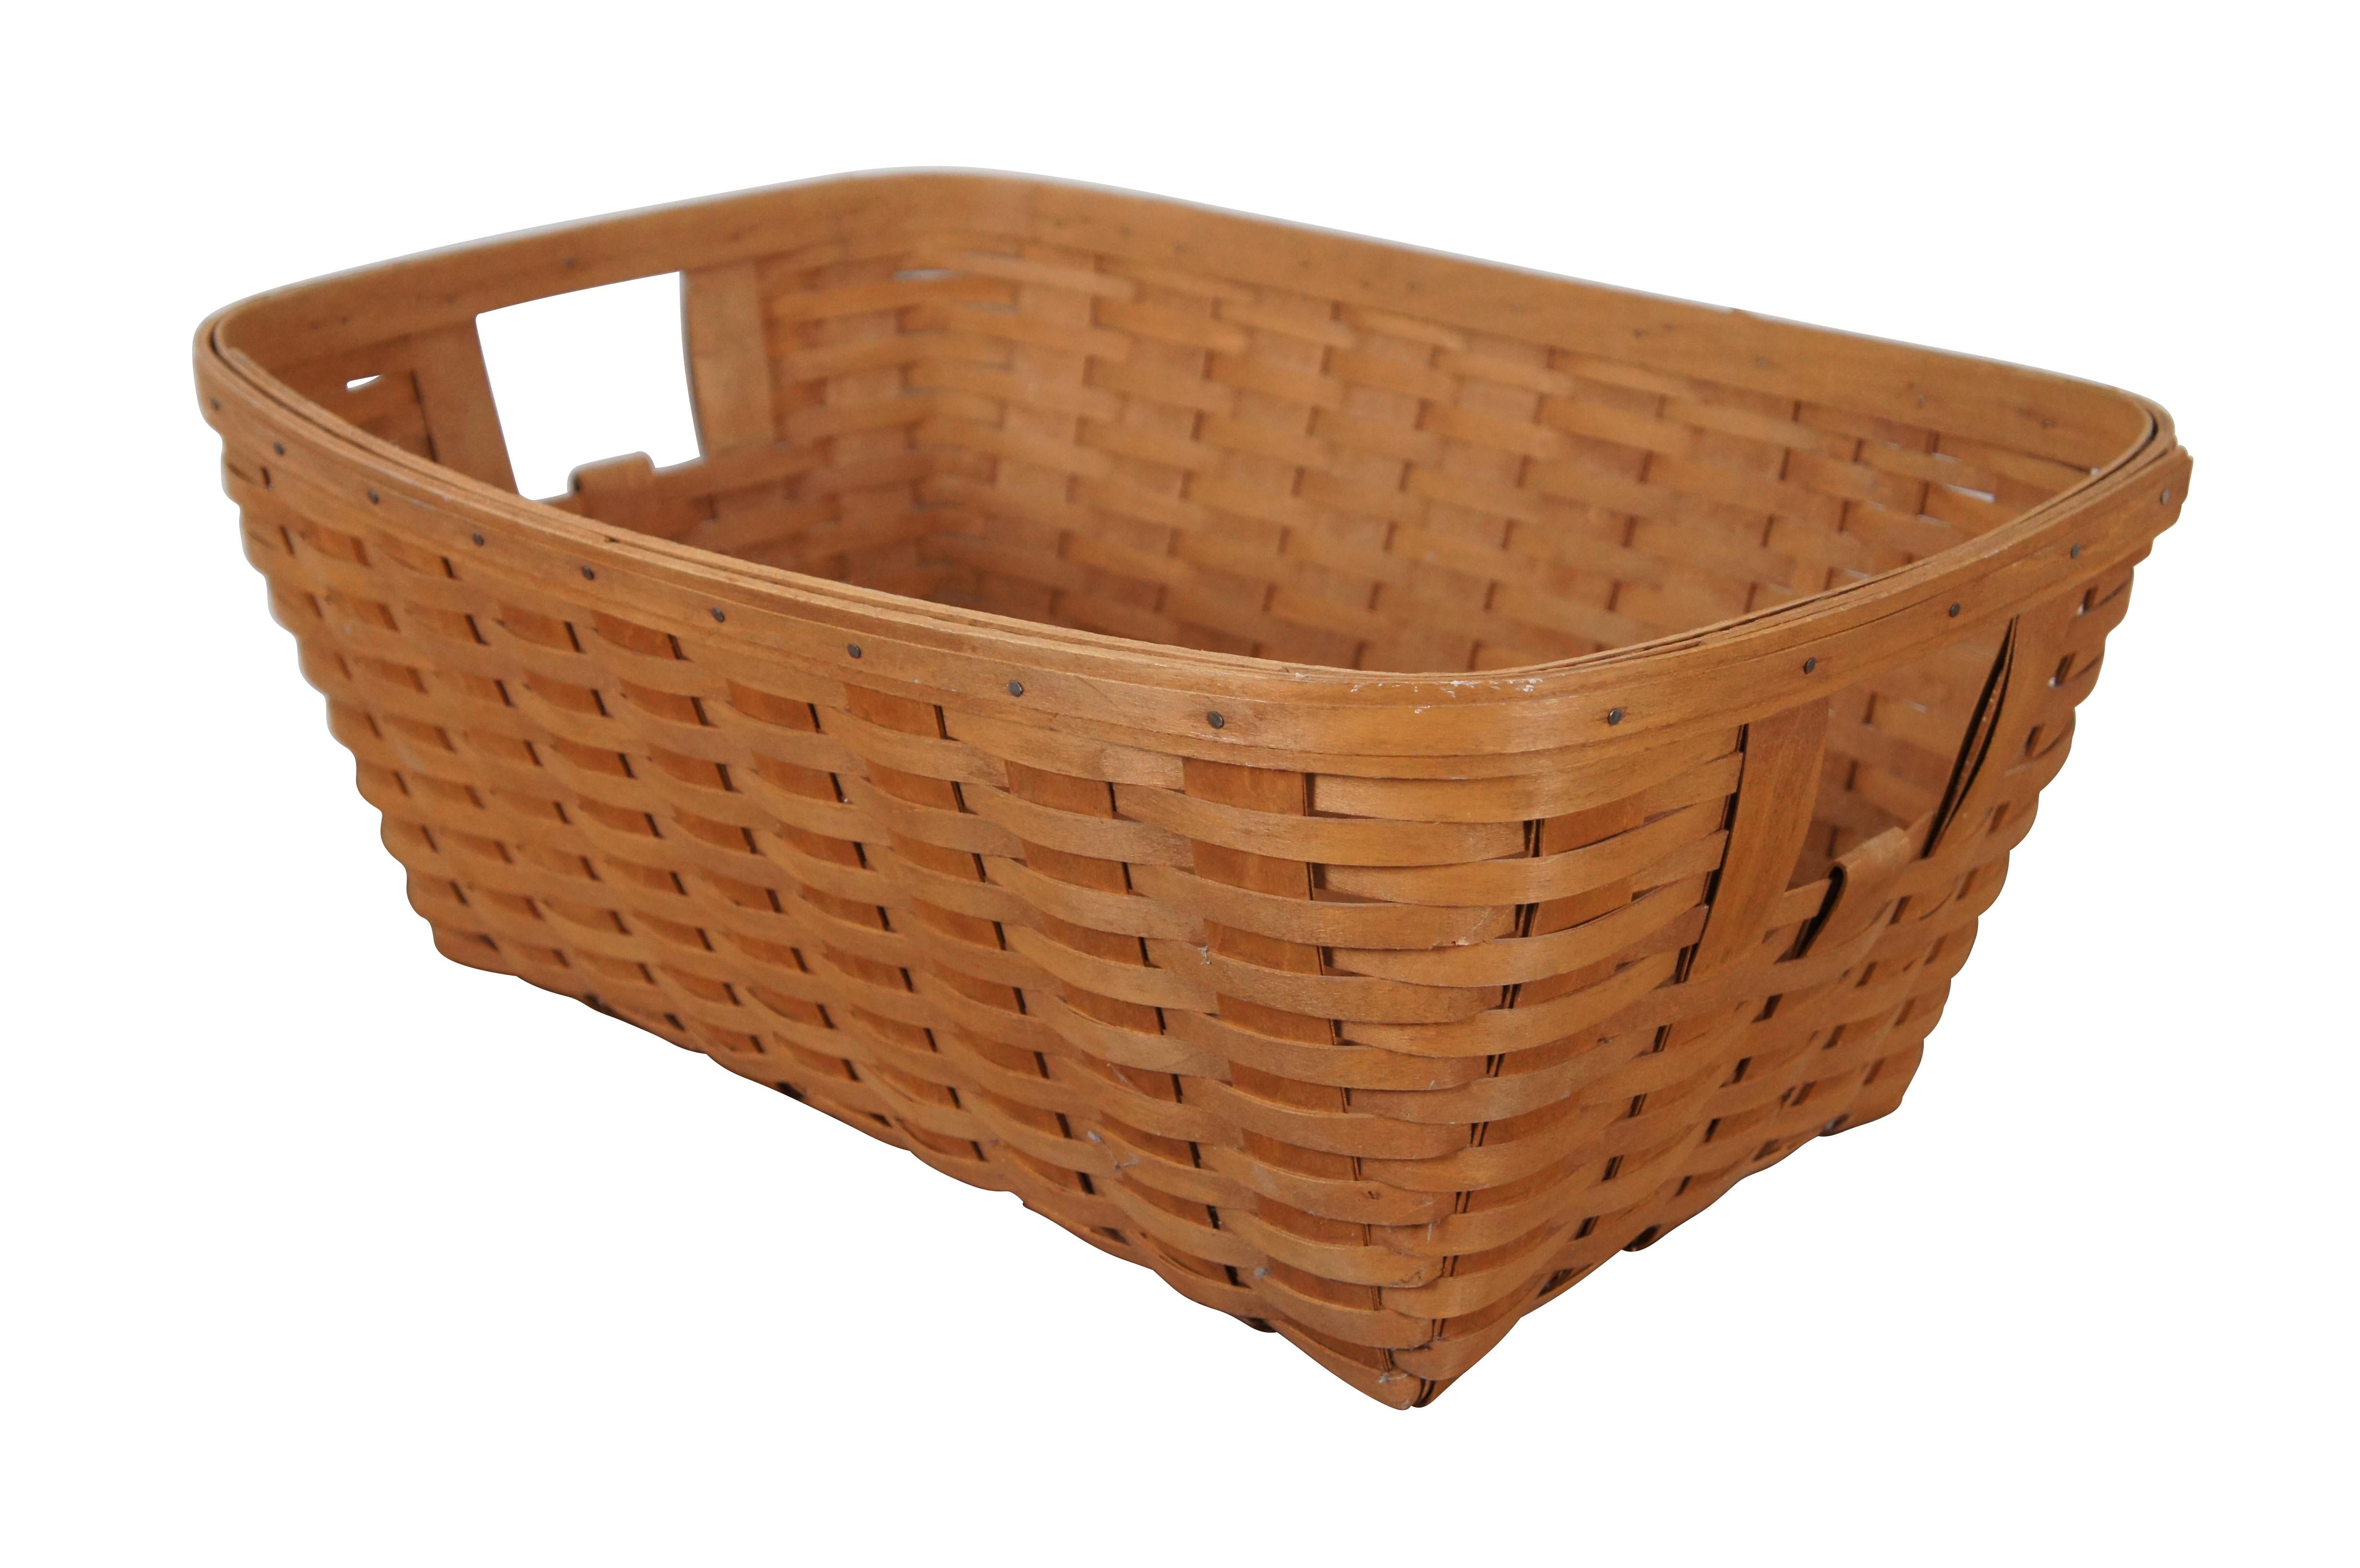 Vintage 1980’s Longaberger laundry basket, handwoven maple wicker with a rectangular form, tapered base, and open handles. No liner. Item number 2600-0. Signed J.W. 1987 on base.

“The Longaberger Company was an American manufacturer and distributor